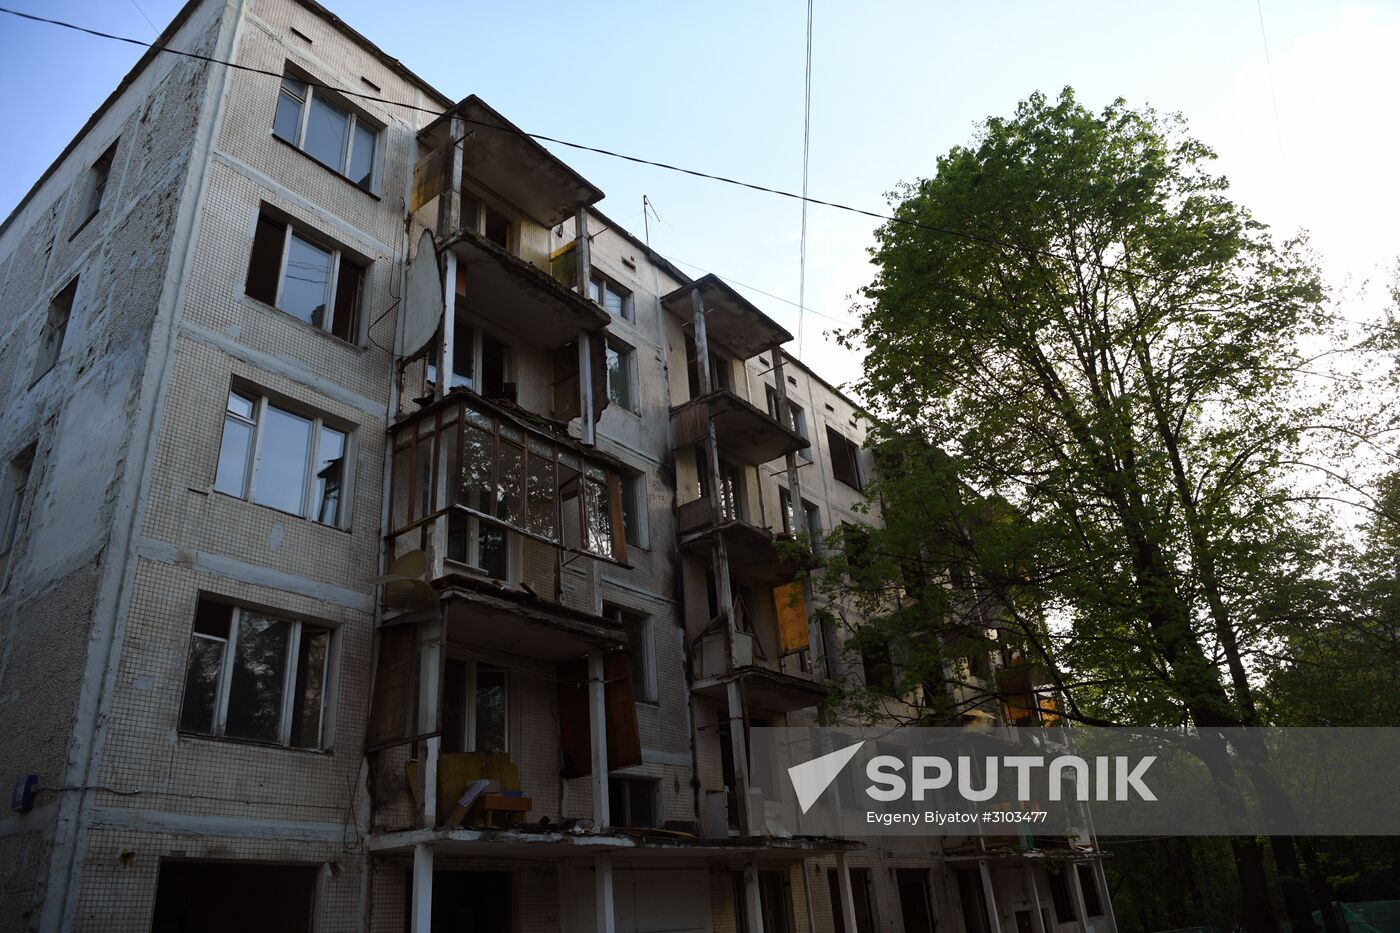 Vacated five-story residential buildings